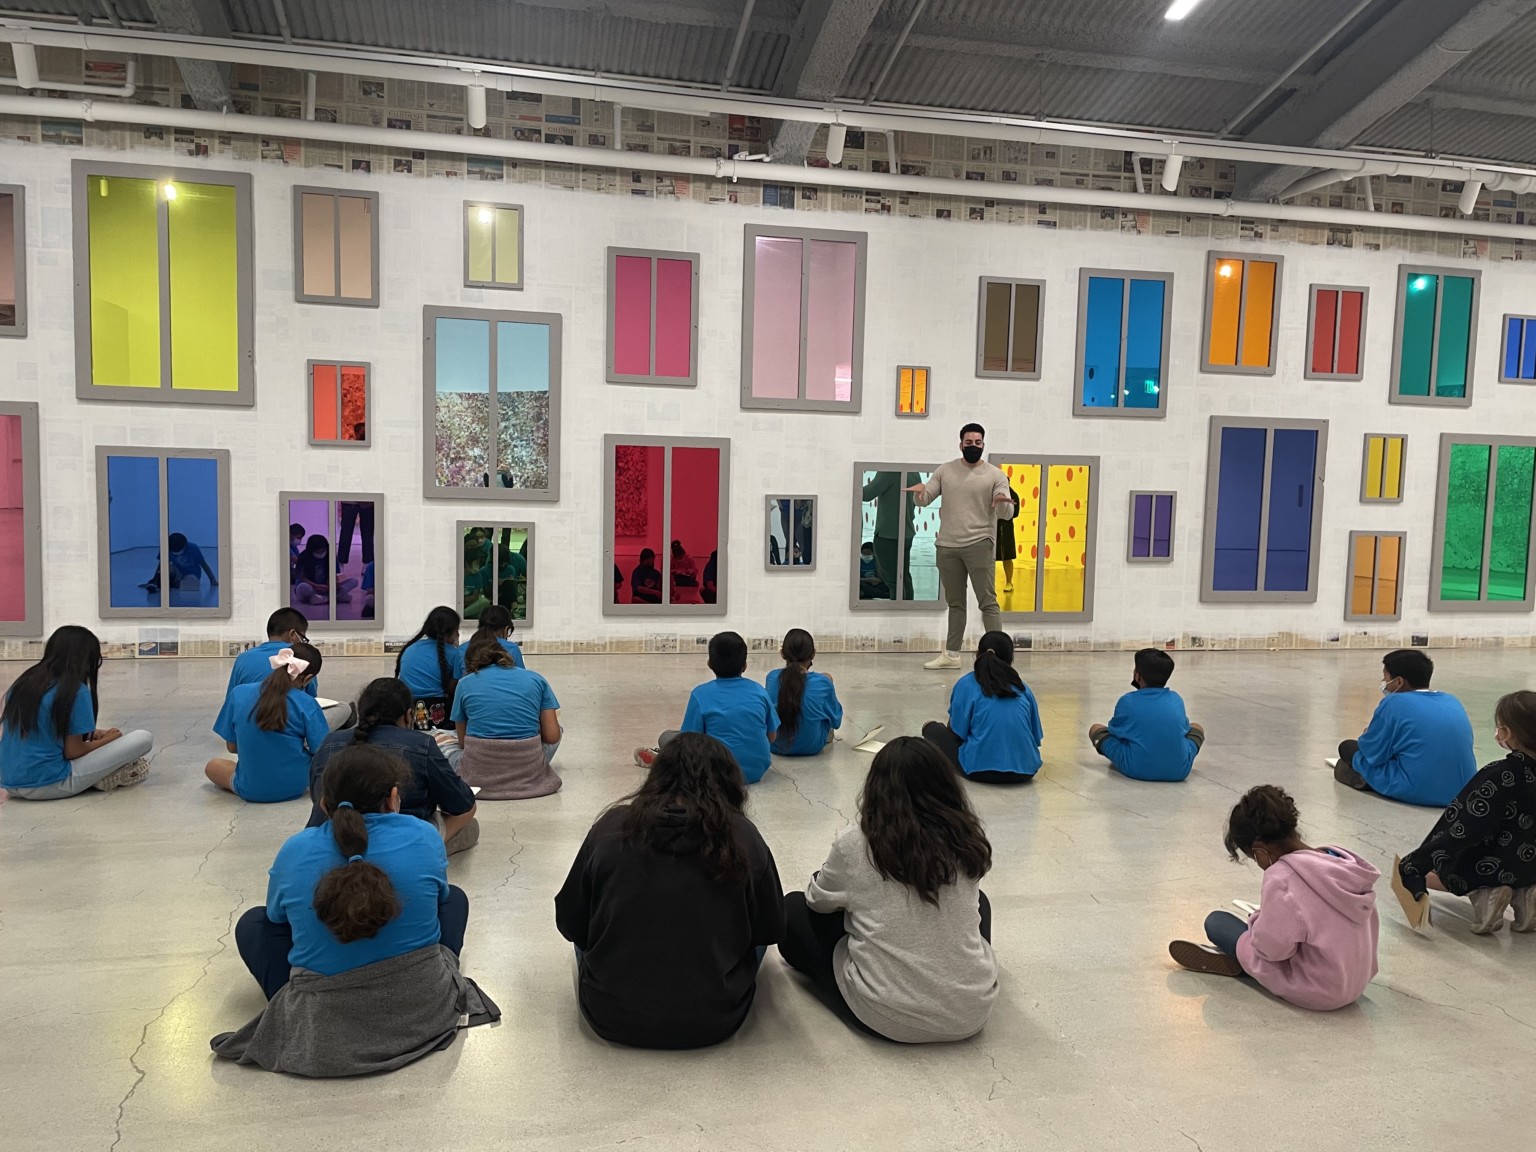 students sitting on the floor looking at a wall of colorful windows at a museum